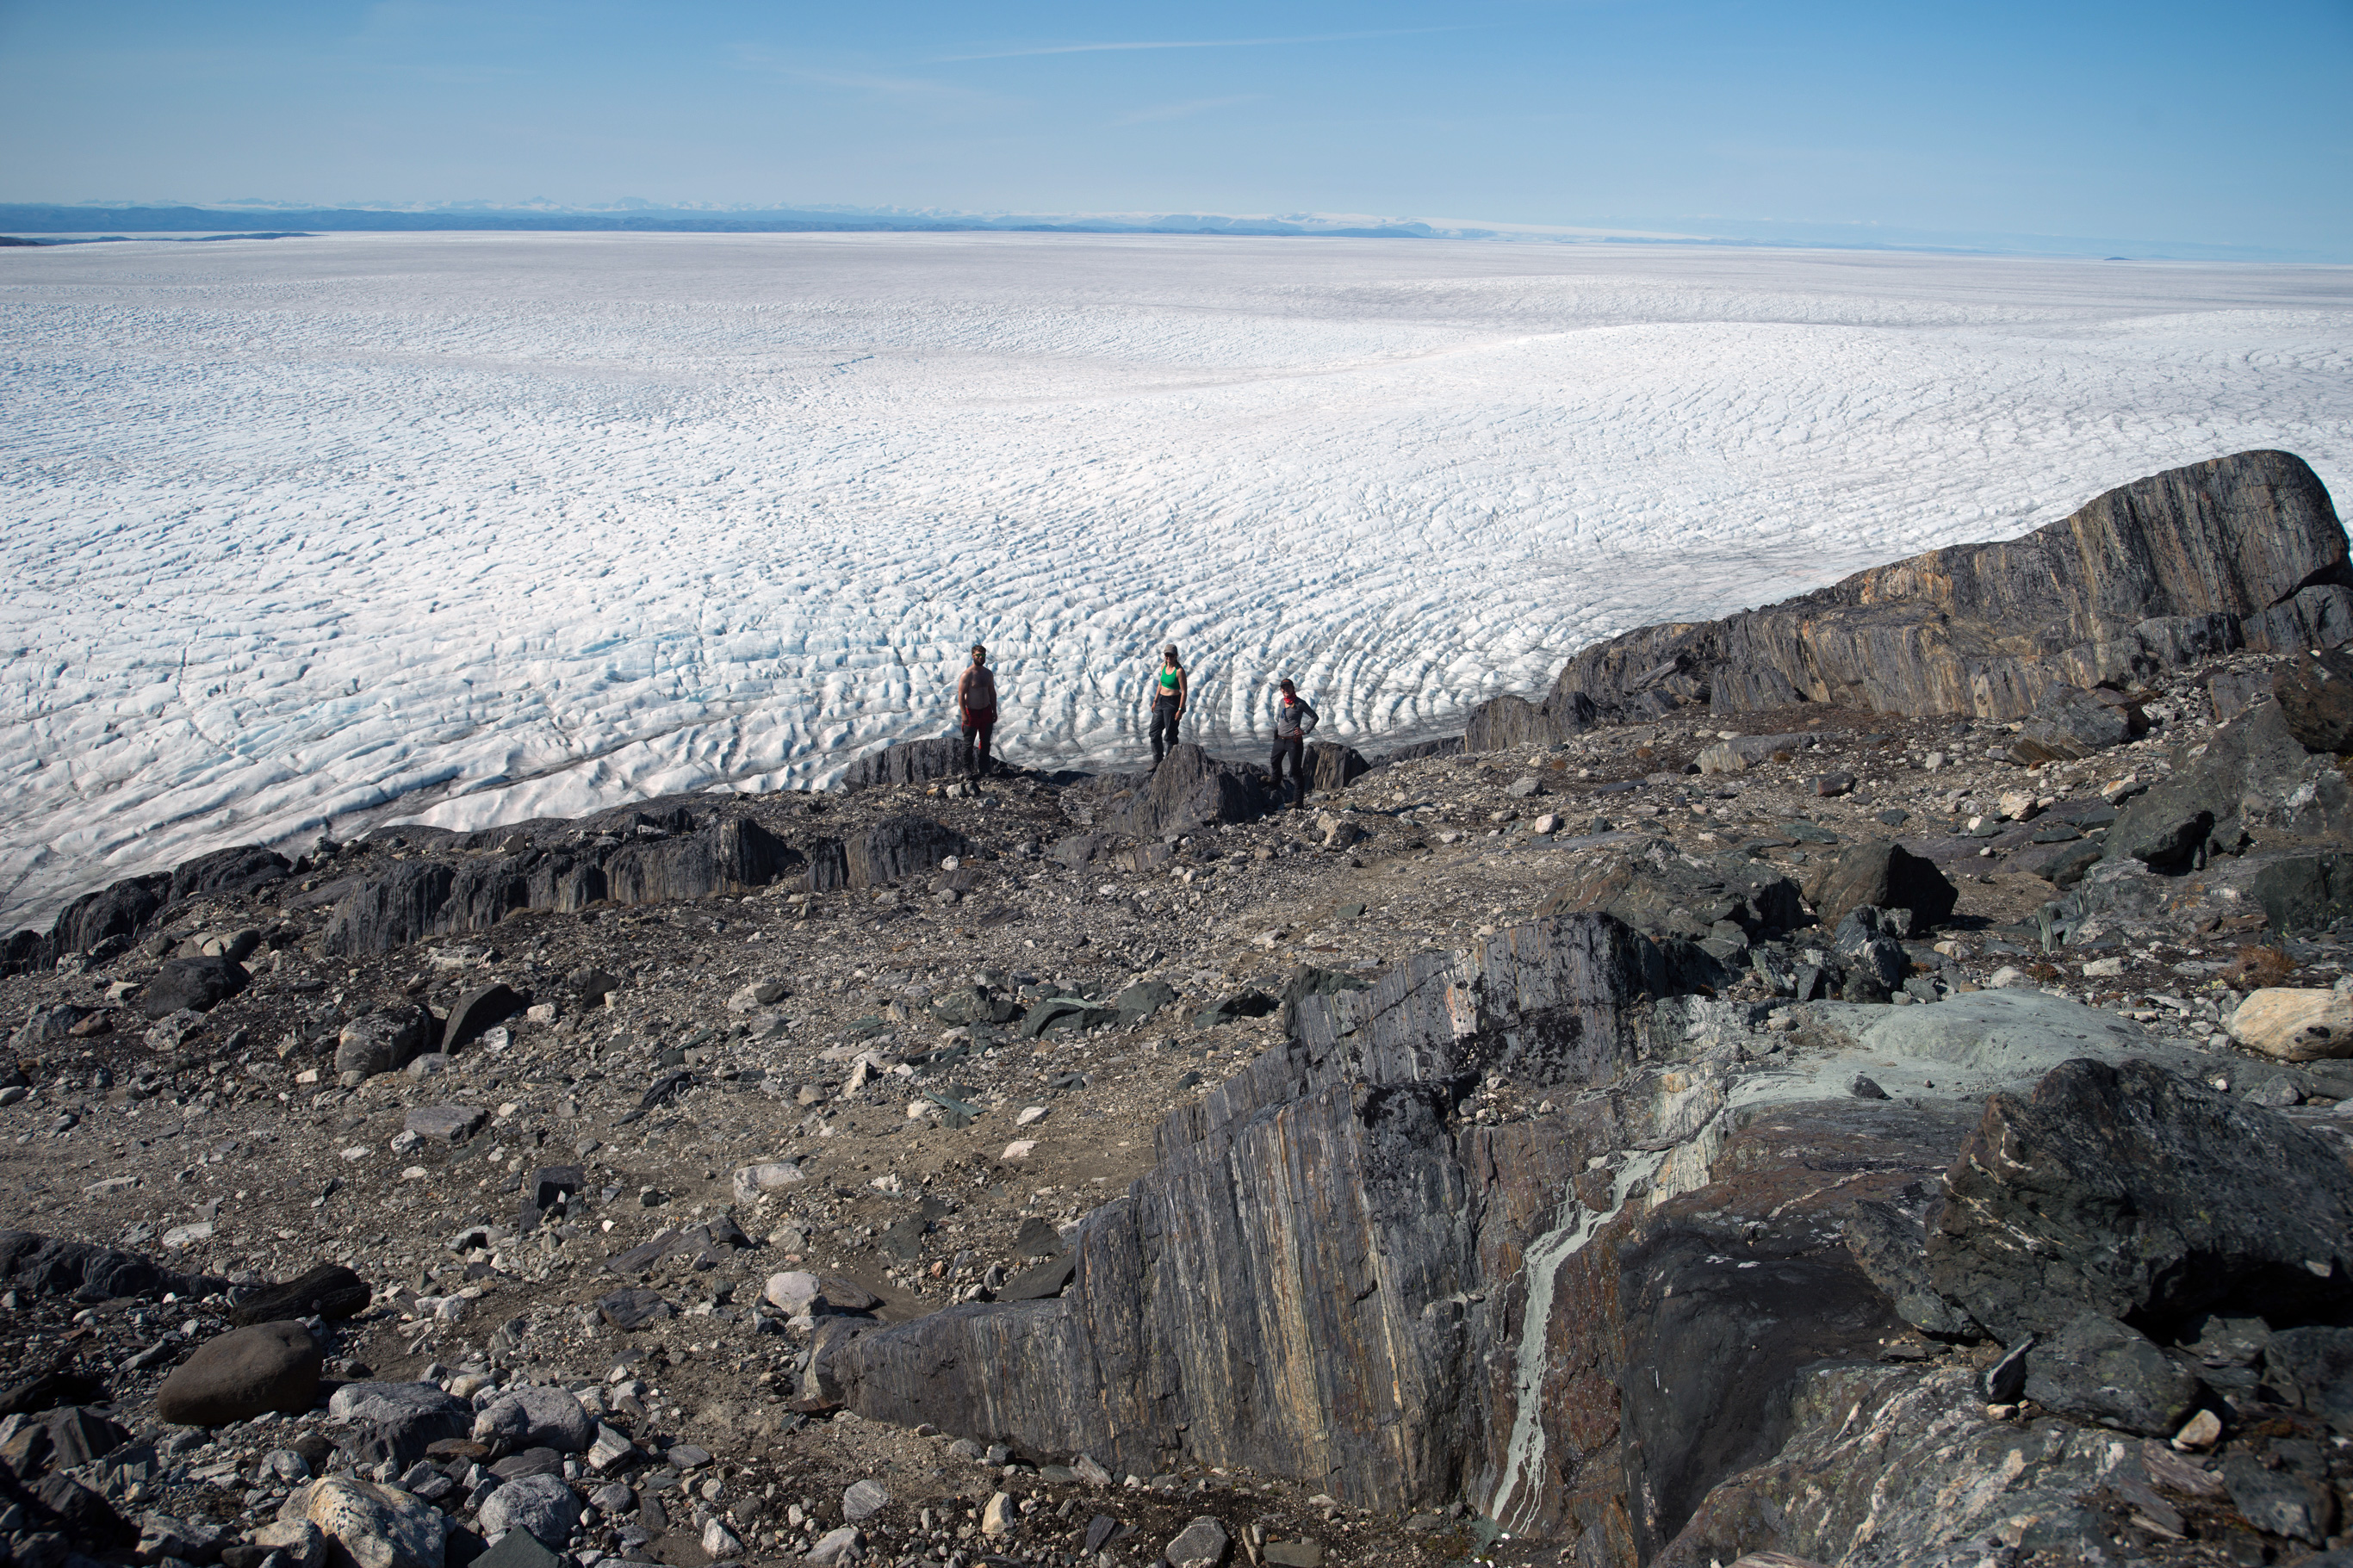 A drone photo shows three small researchers on a rocky formation, with a vast expanse of ice and snow in background.